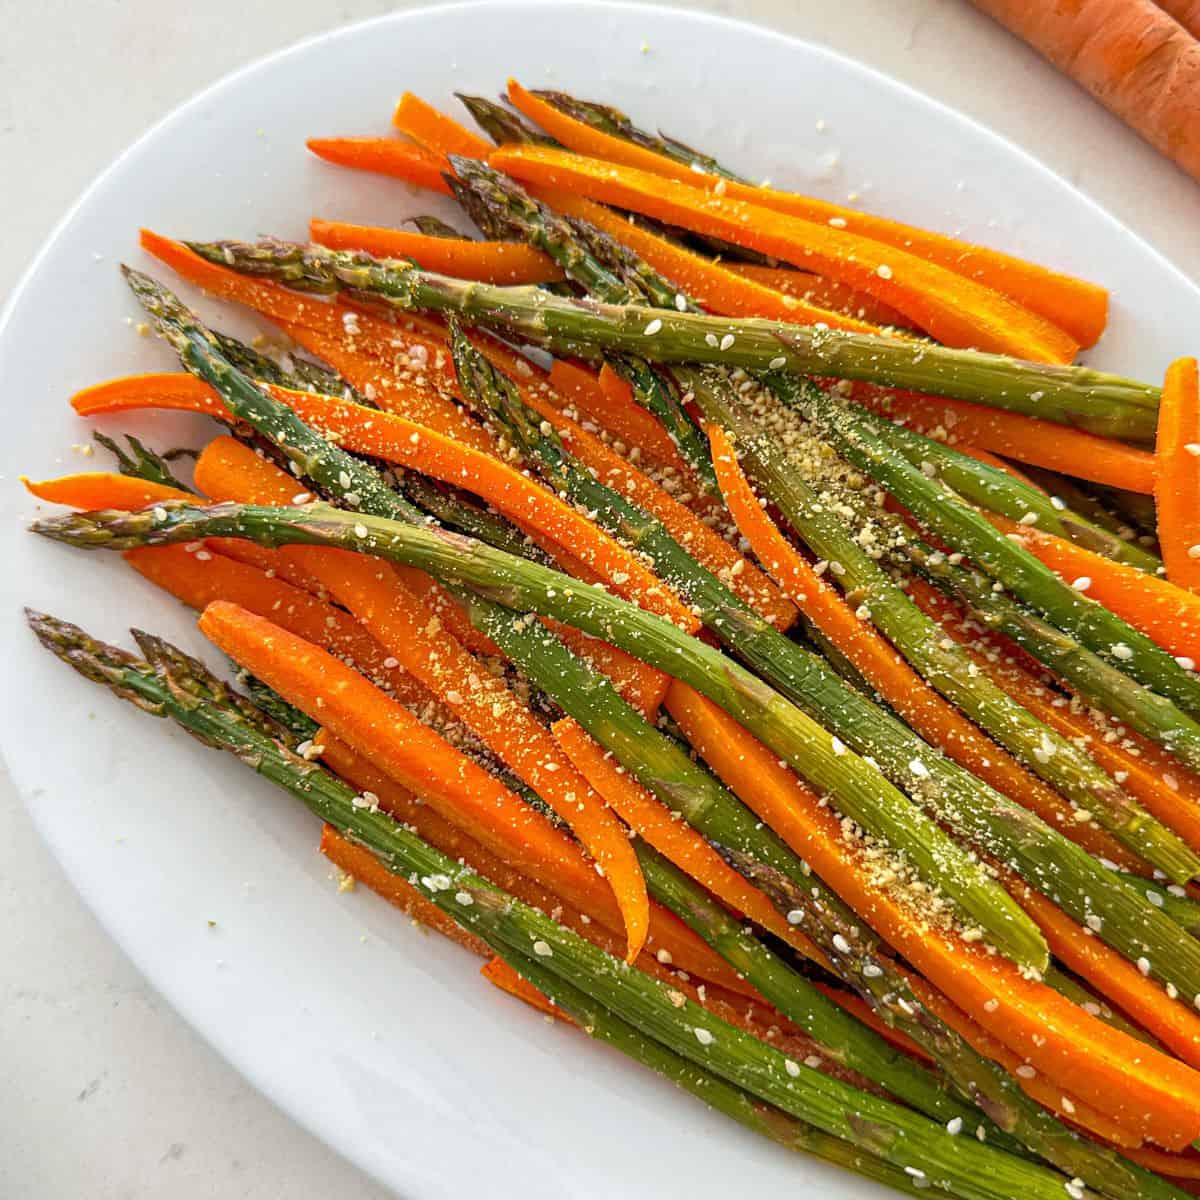 Platter with roasted asparagus and carrots on top.